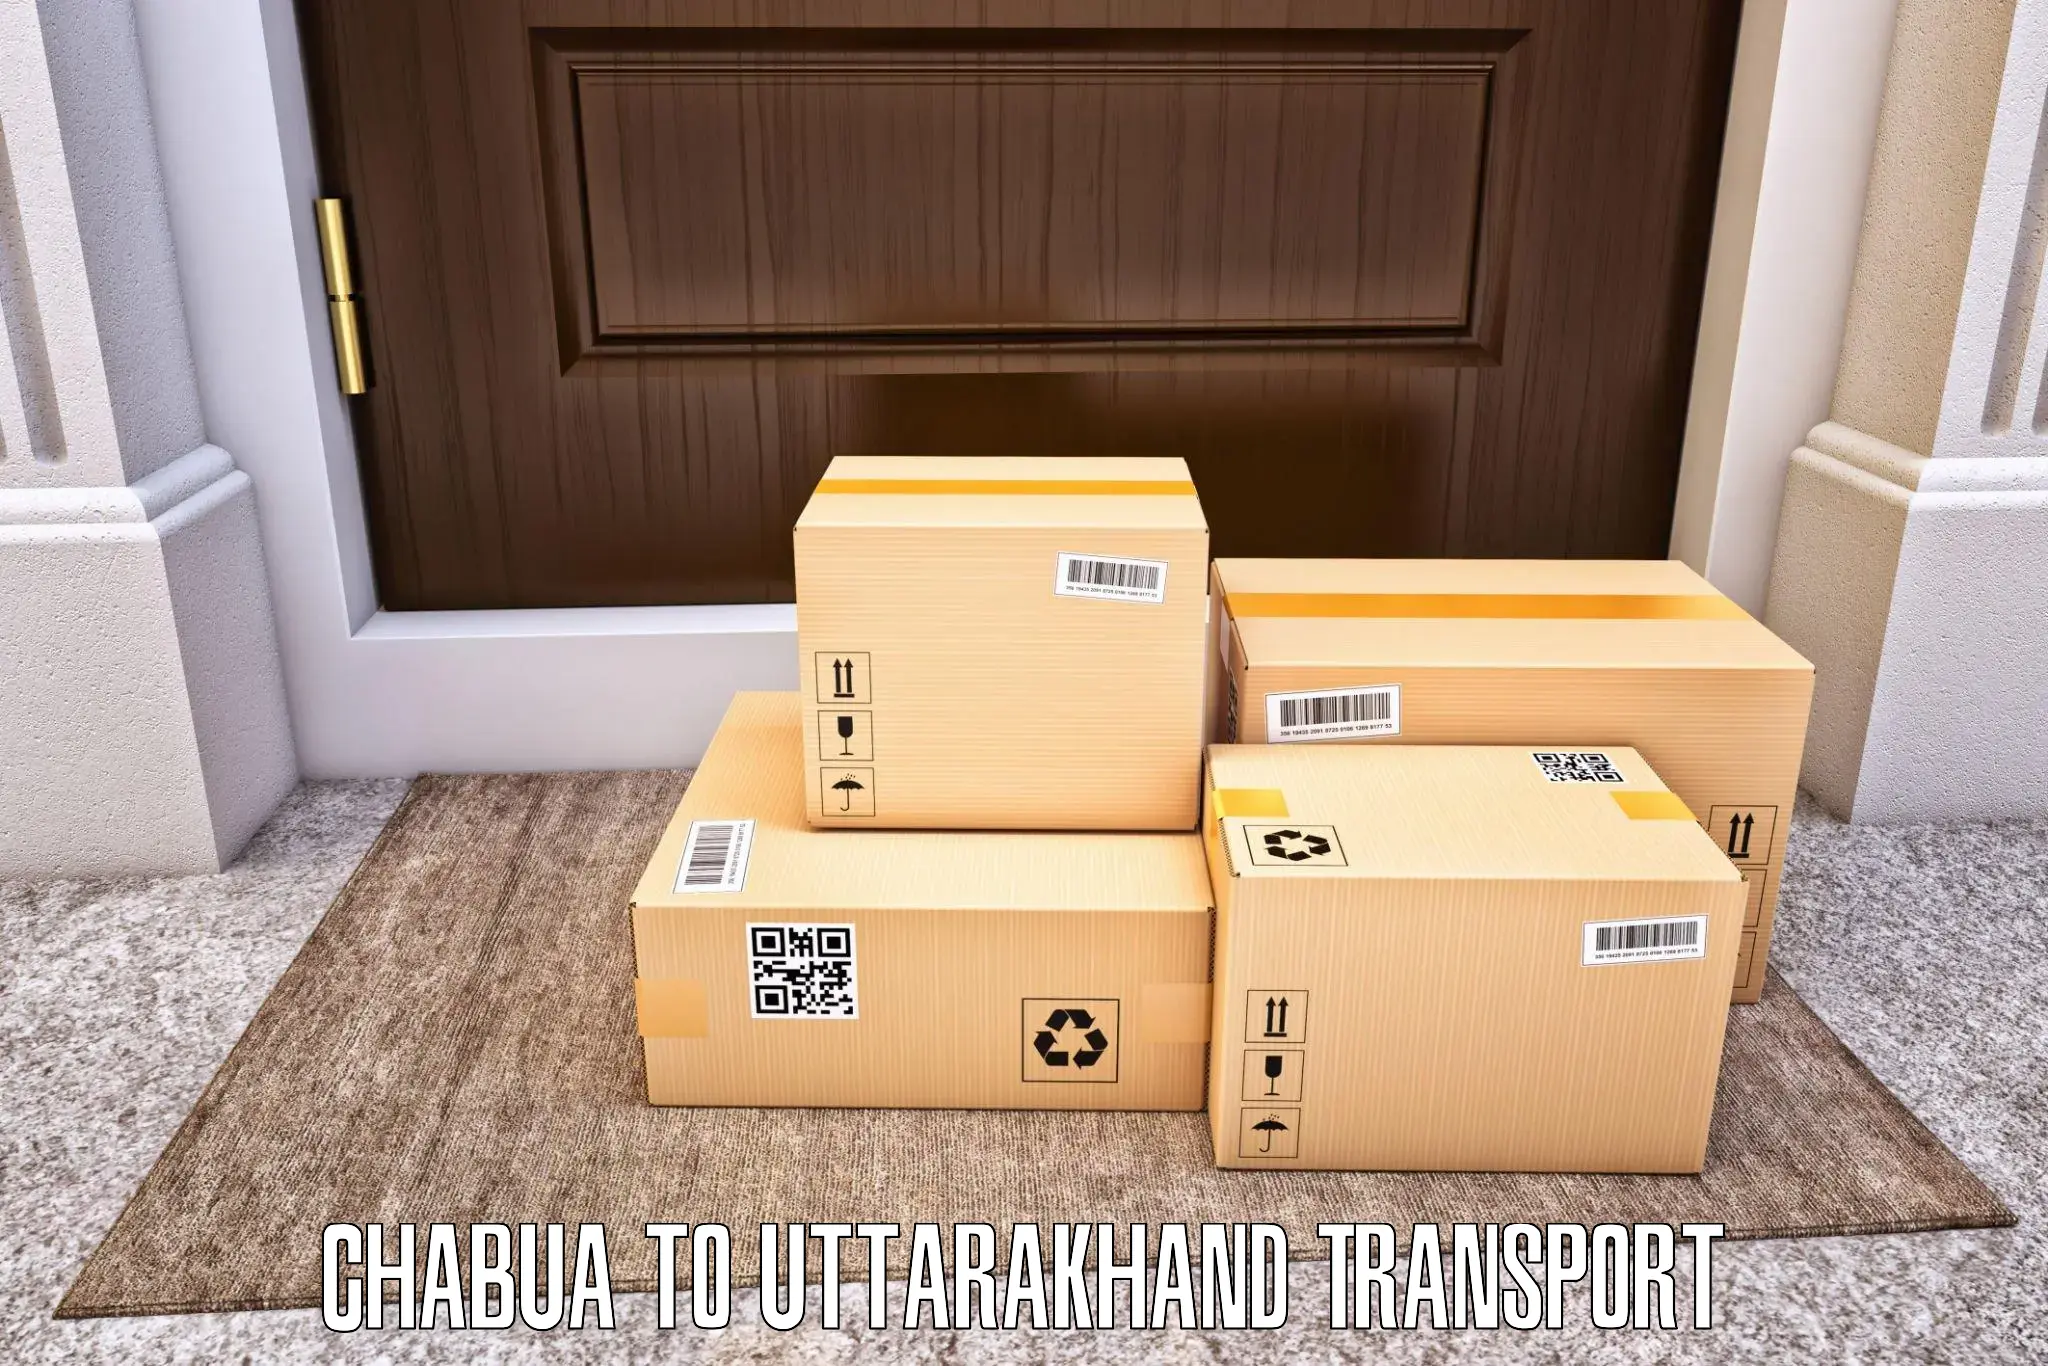 Daily parcel service transport in Chabua to Roorkee